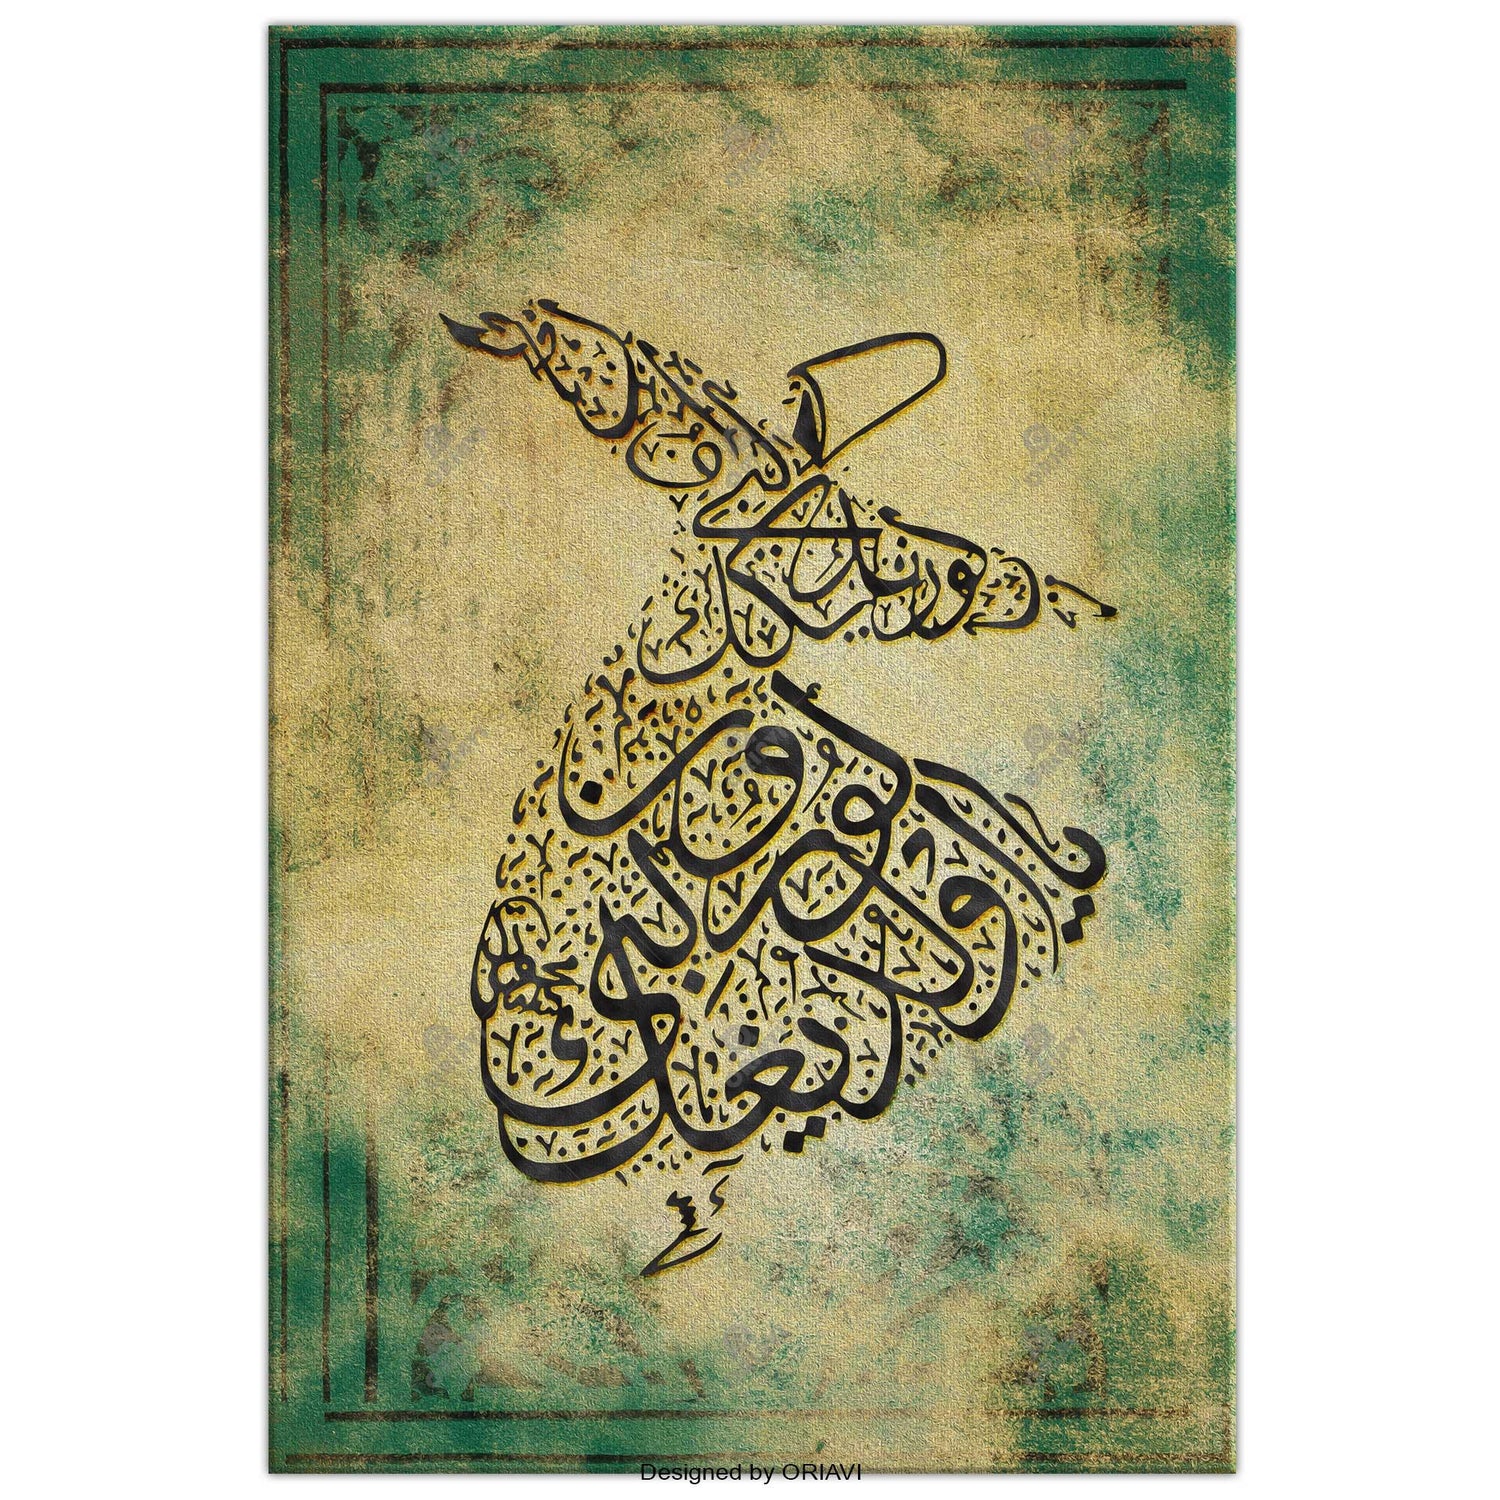 Sama dance calligraphy wall art, High Quality and Ready to Hang. This Modern Persian Wall décor completes and elevates your home. Amazing and eye-catching for your home or office.